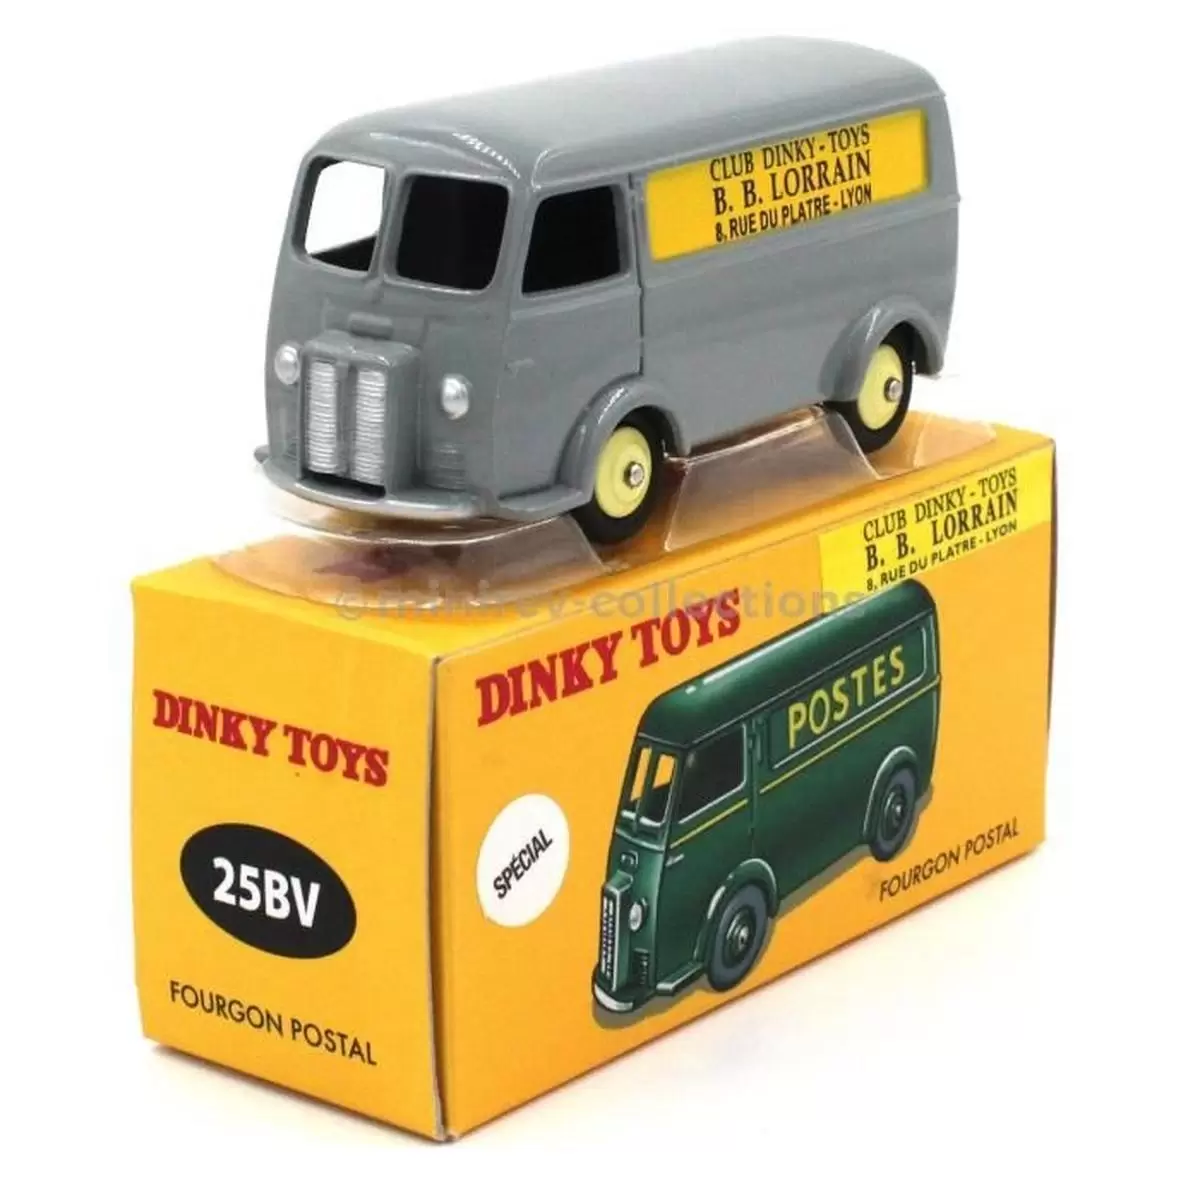 Atlas - Classic Dinky Toys Collection - PEUGEOT Fourgonnette D3A \